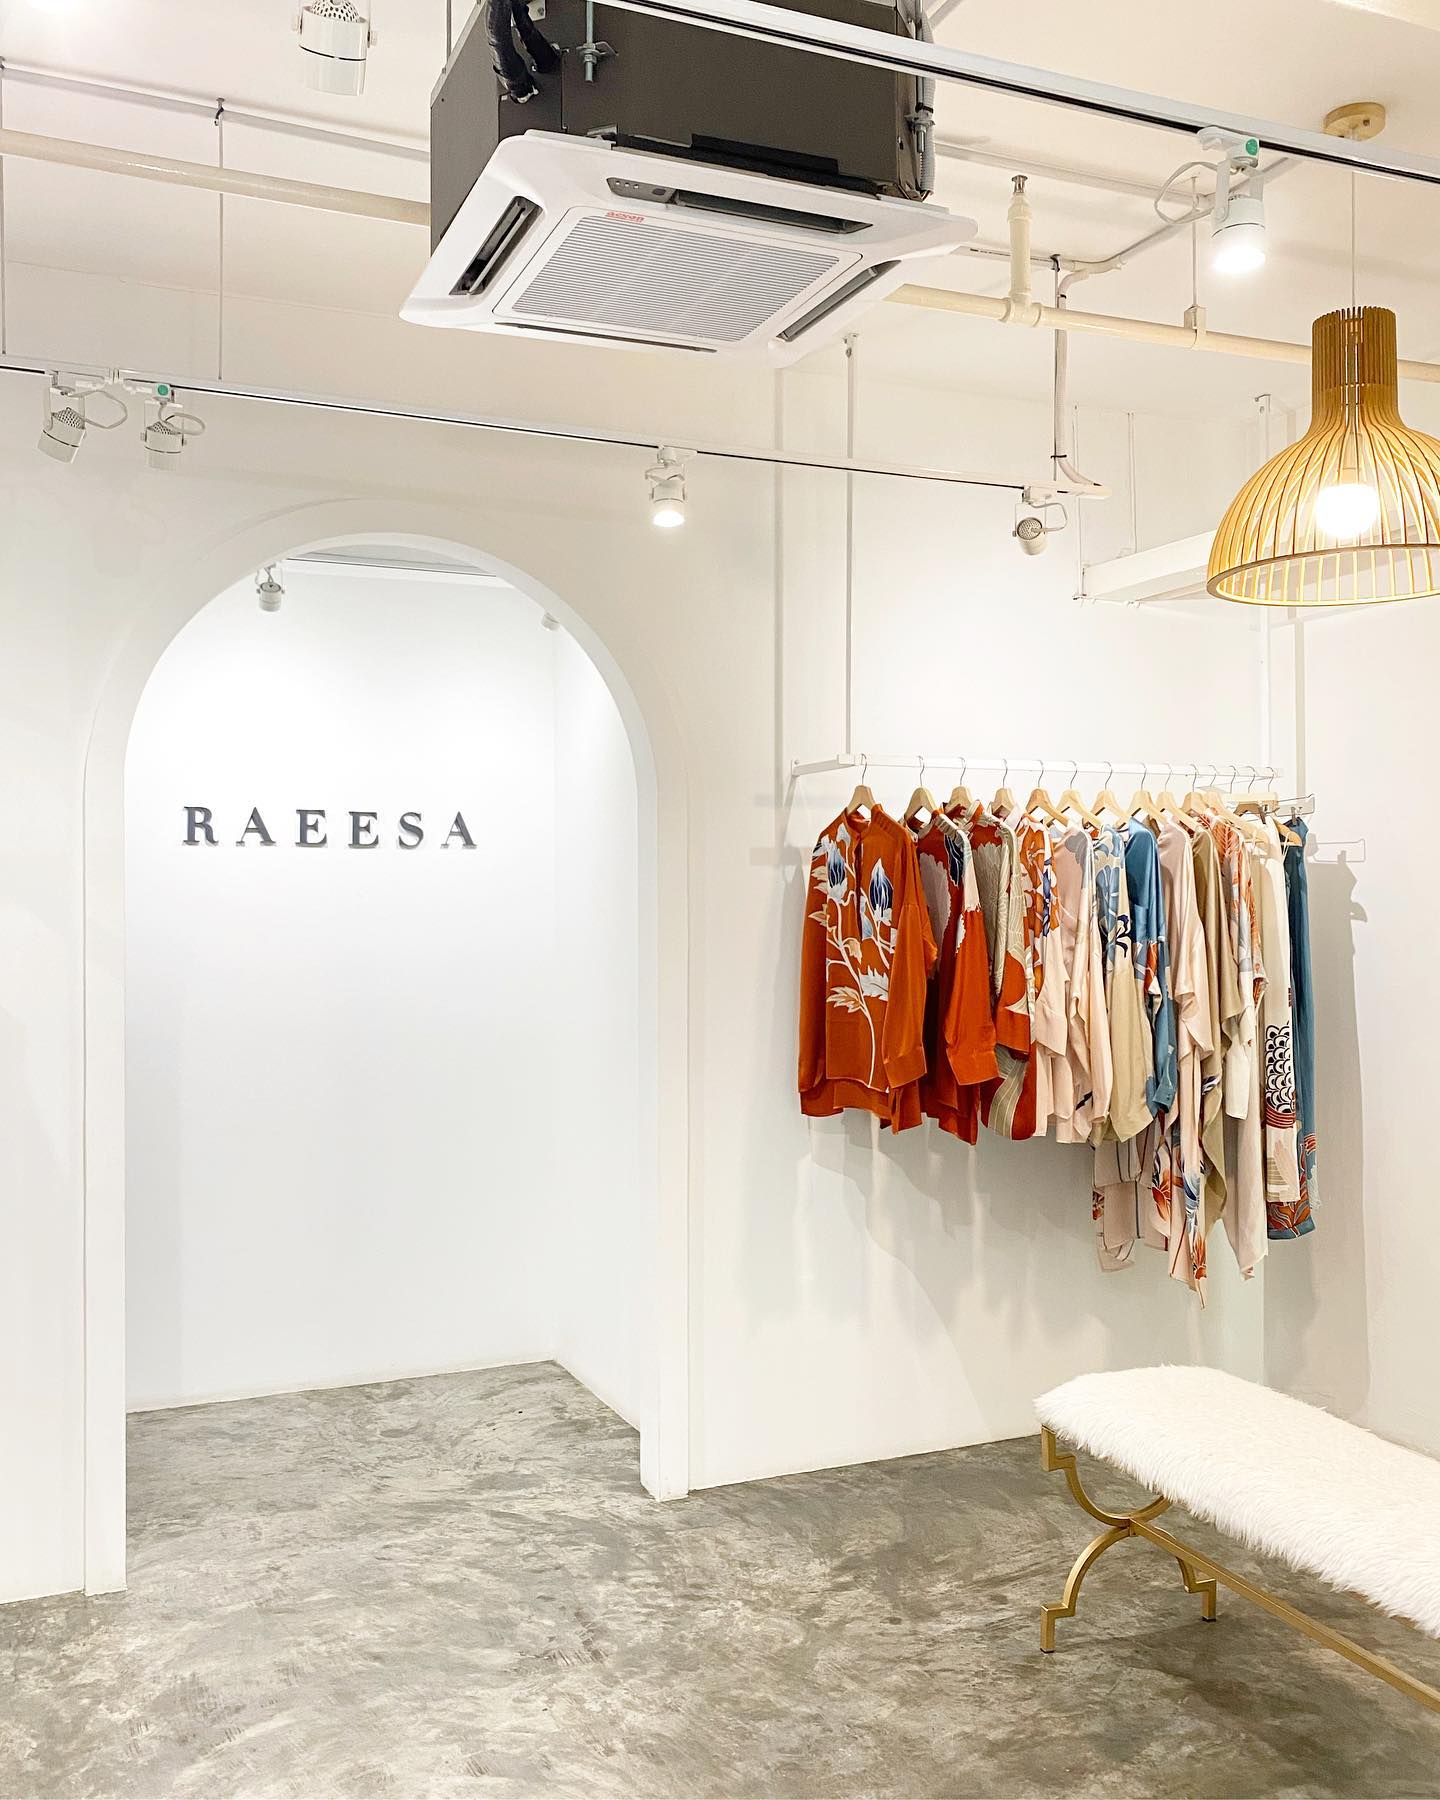 Hello darlings, we wish you have an Amazing Day🤎

Checkout Raeesa Cruise 2023 now available for PRE ORDER at www.raeesa.com or look into our story to know more about this!🤍🕊

#piecesbyraeesa